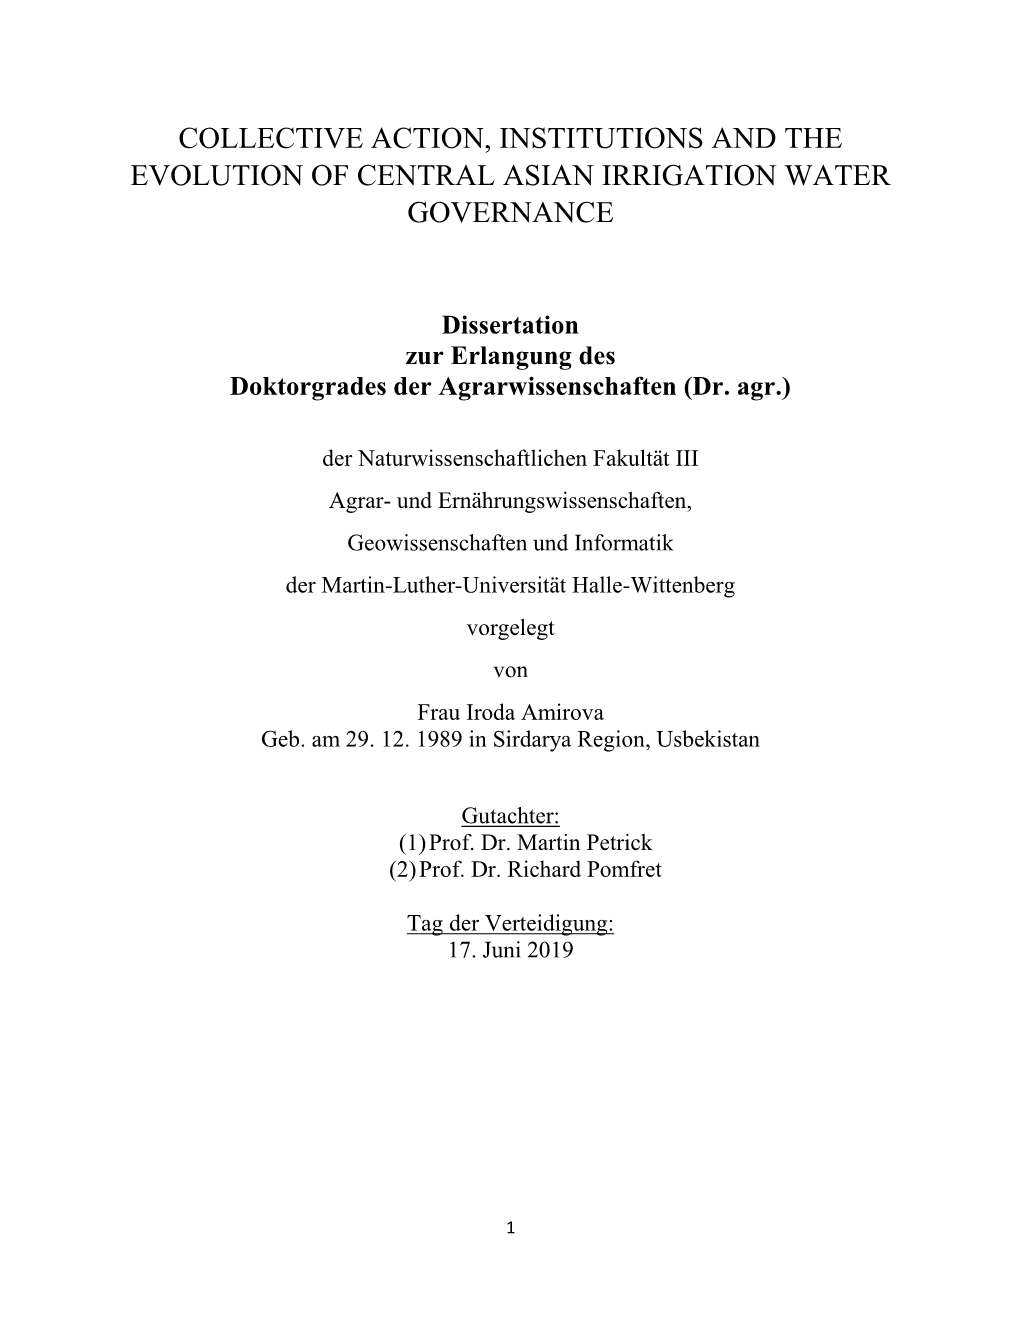 Collective Action, Institutions and the Evolution of Central Asian Irrigation Water Governance